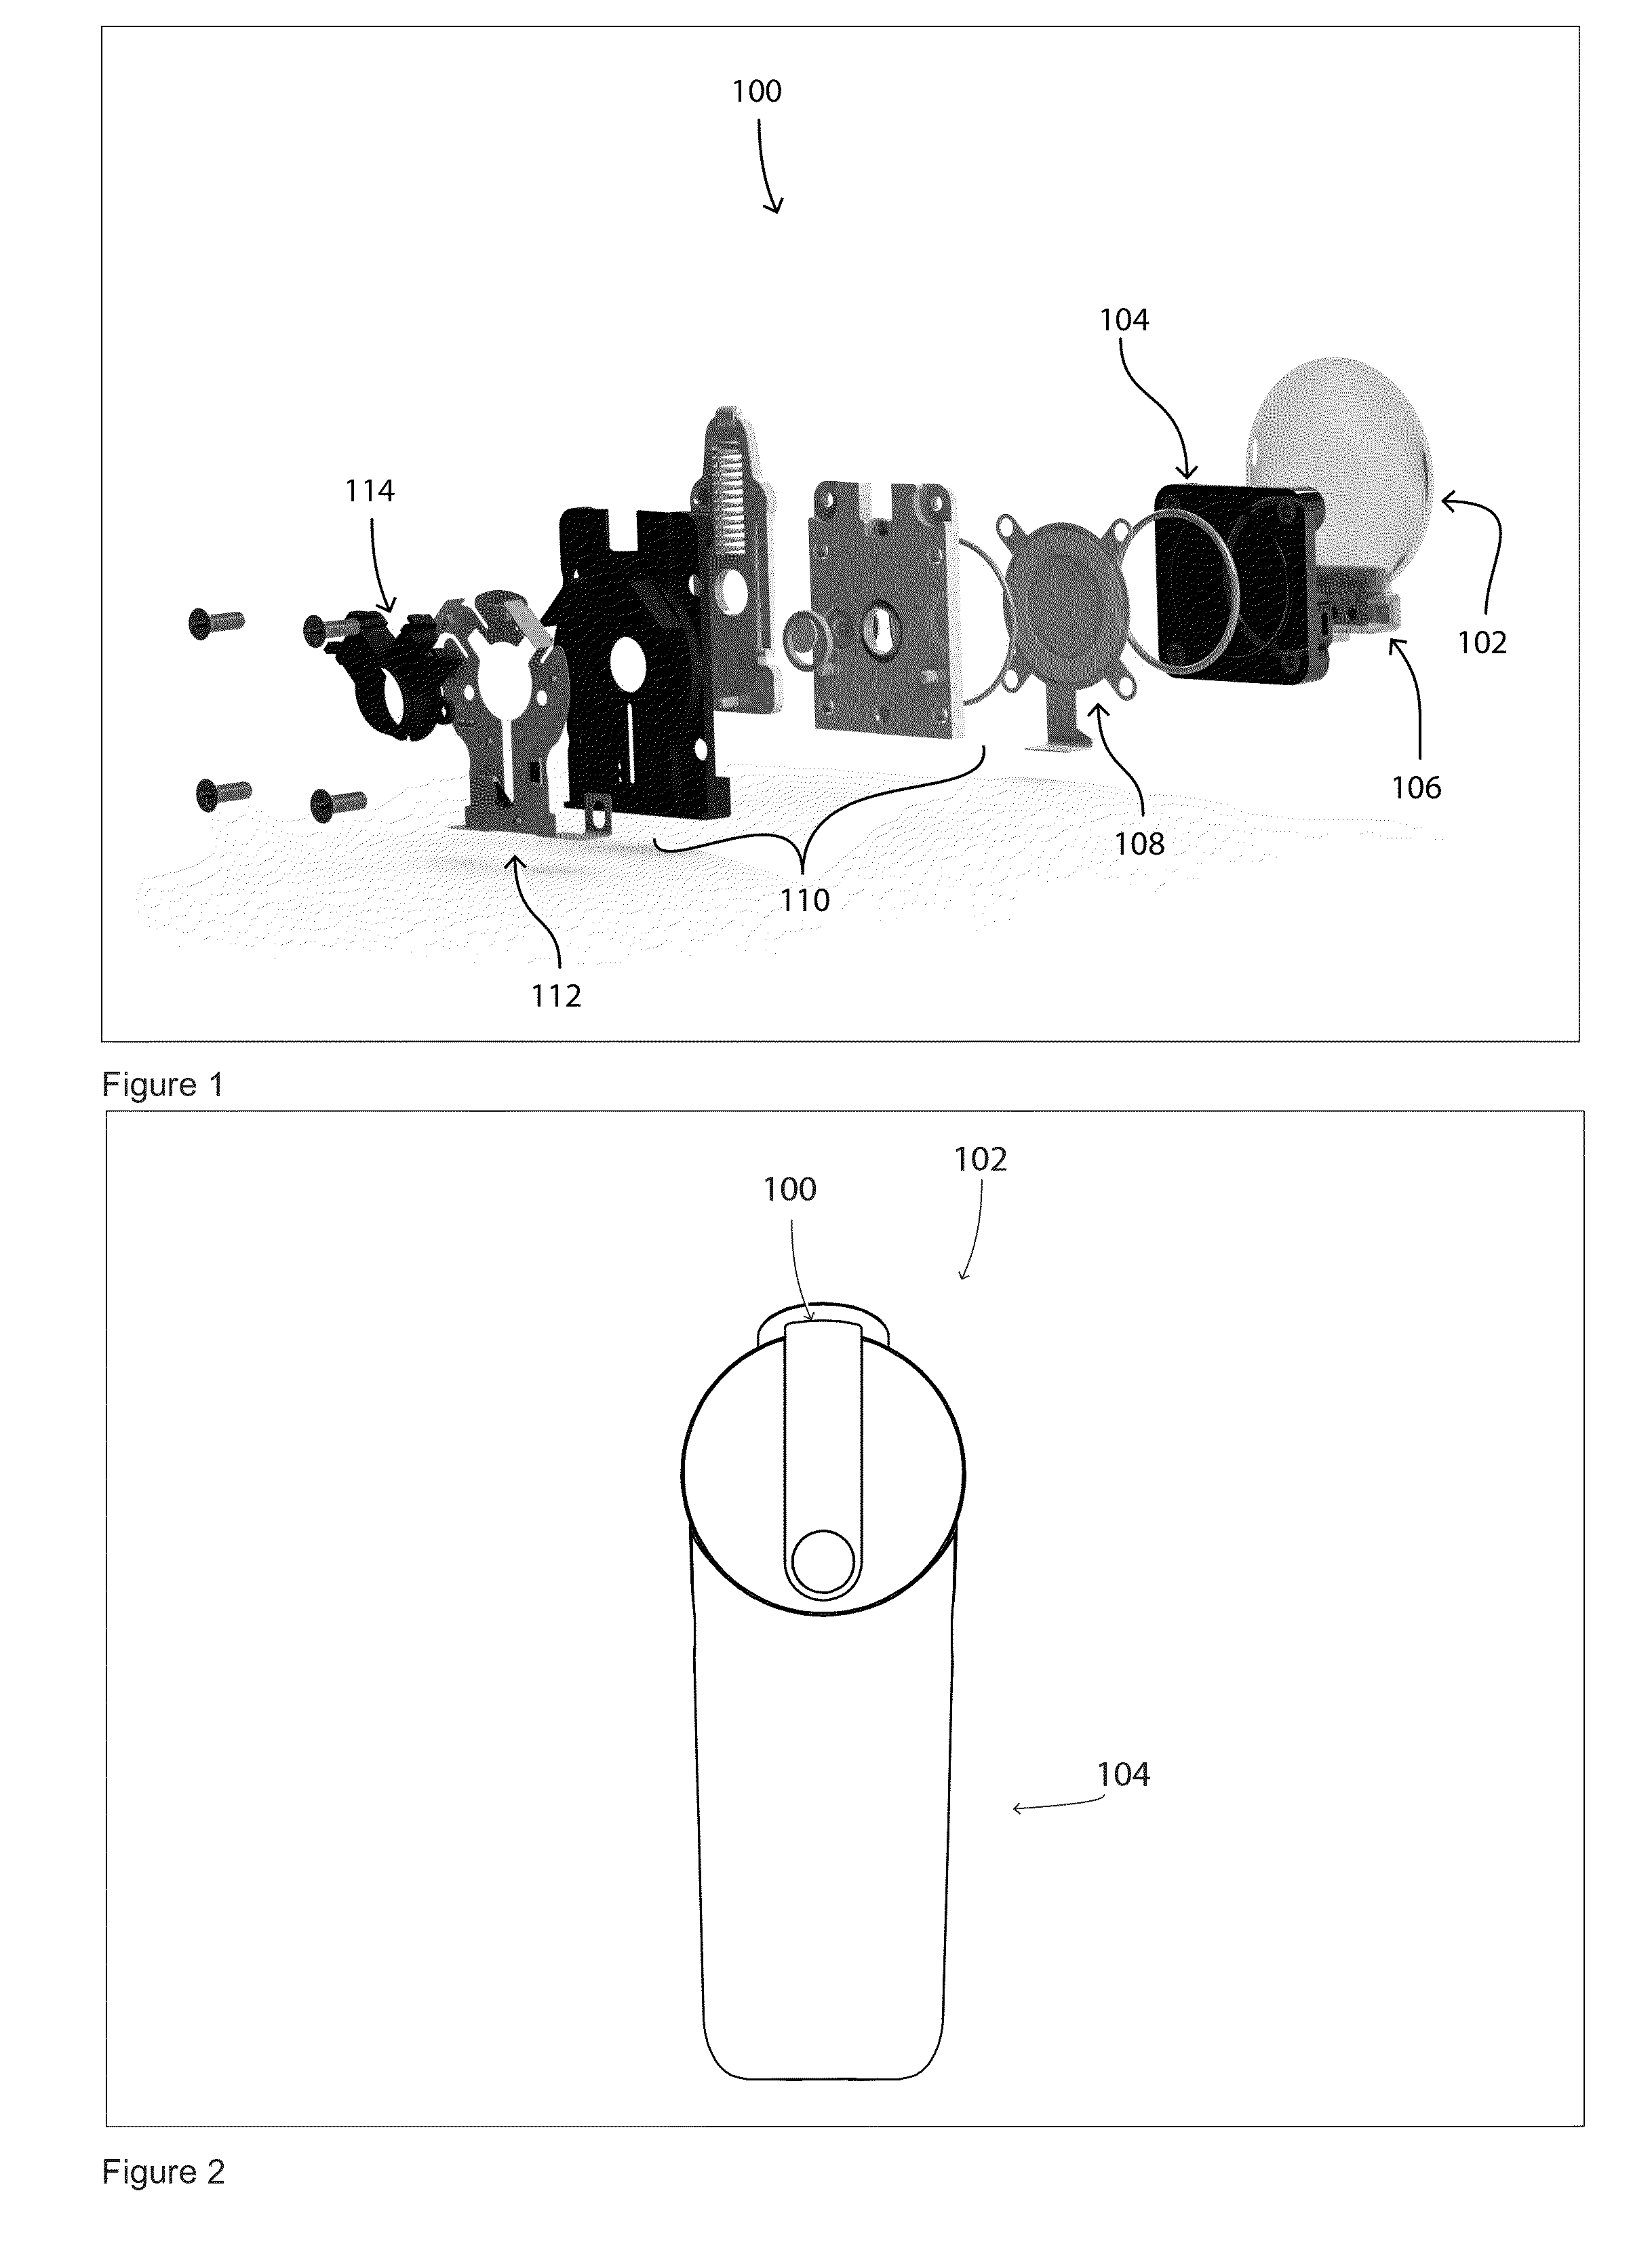 Spray ejector device and methods of use